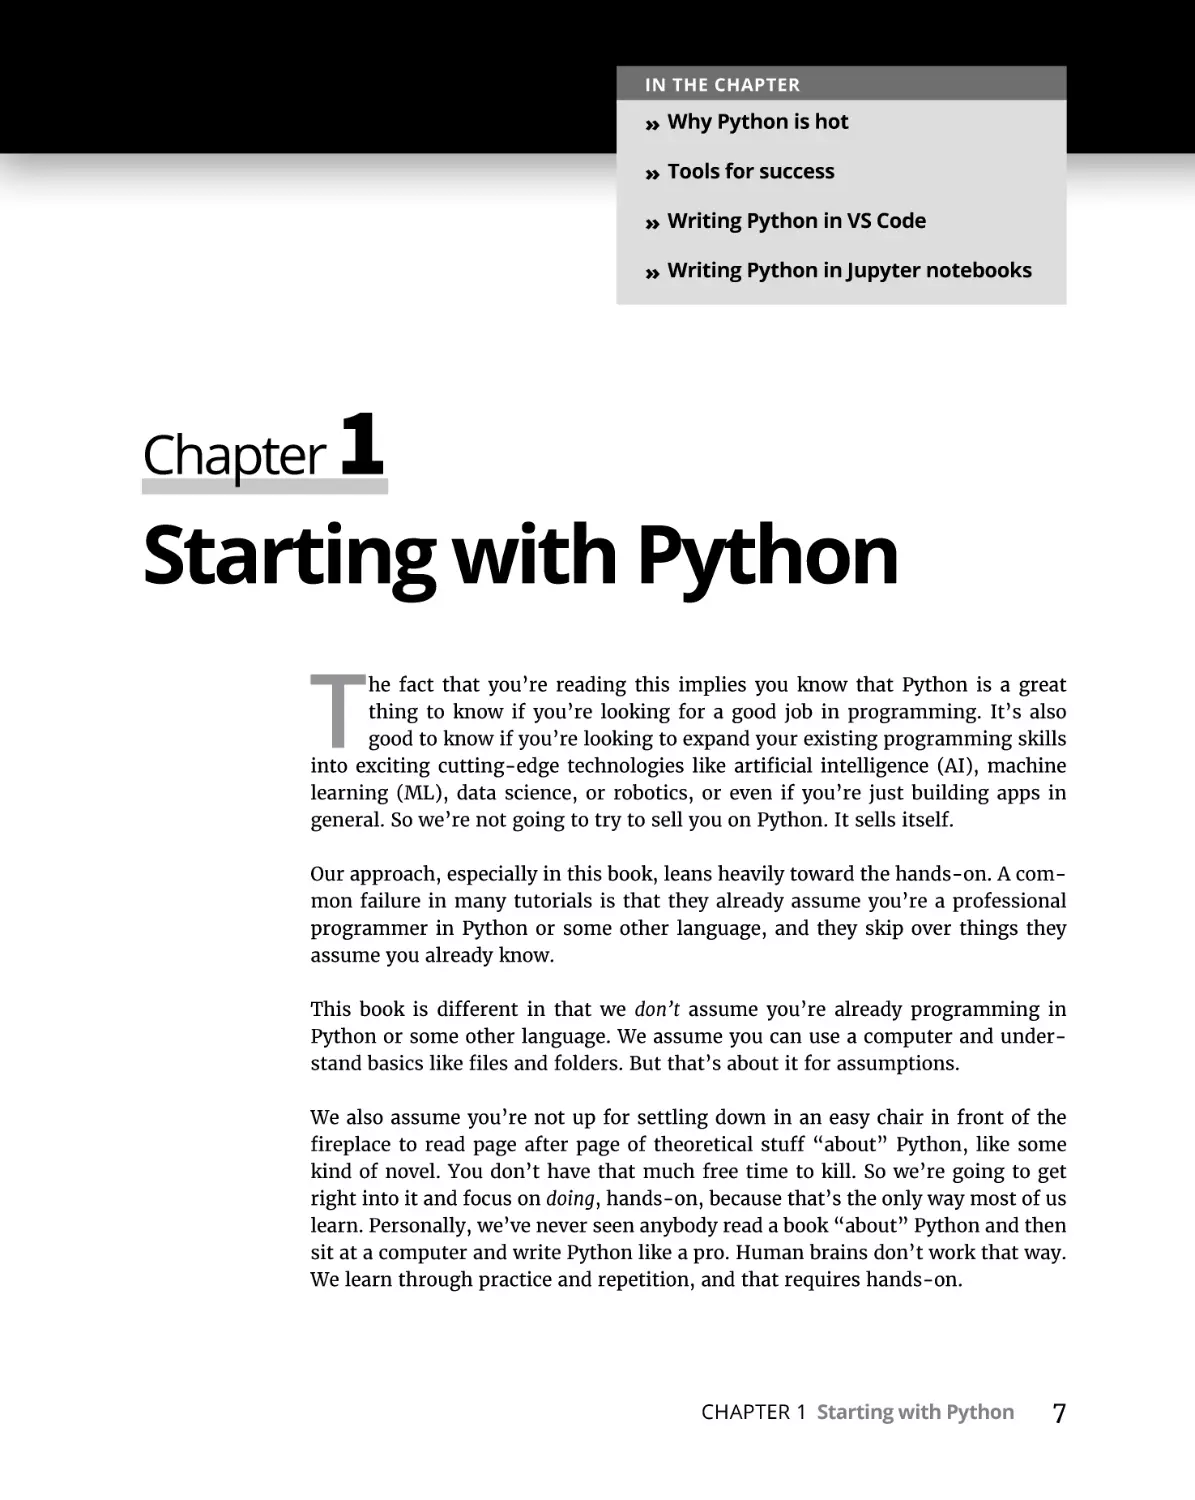 Chapter 1 Starting with Python